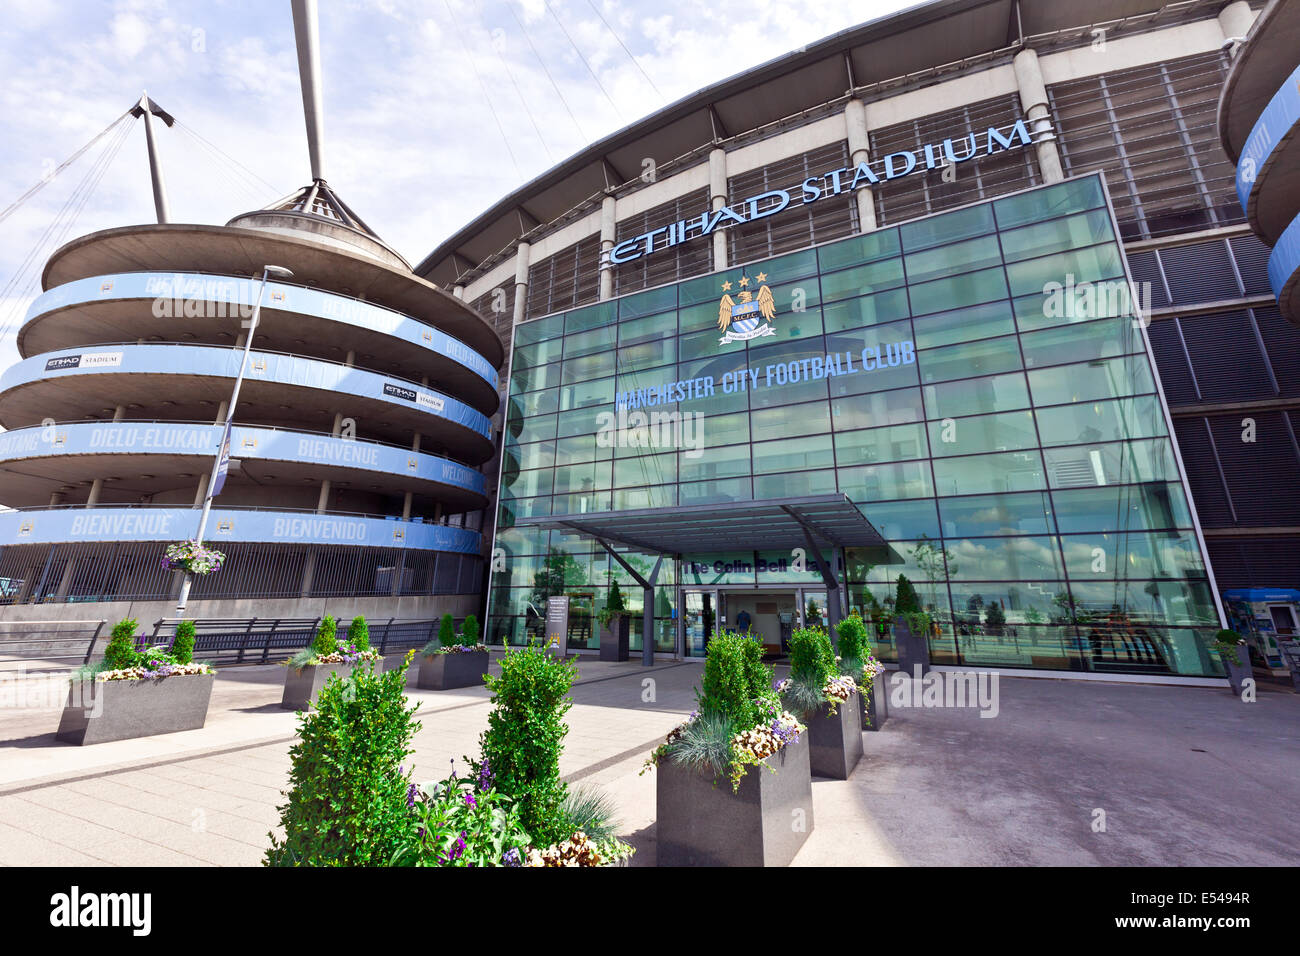 Etihad stadium is home to Manchester City English Premier League football club, one of the most successful clubs in England. Stock Photo